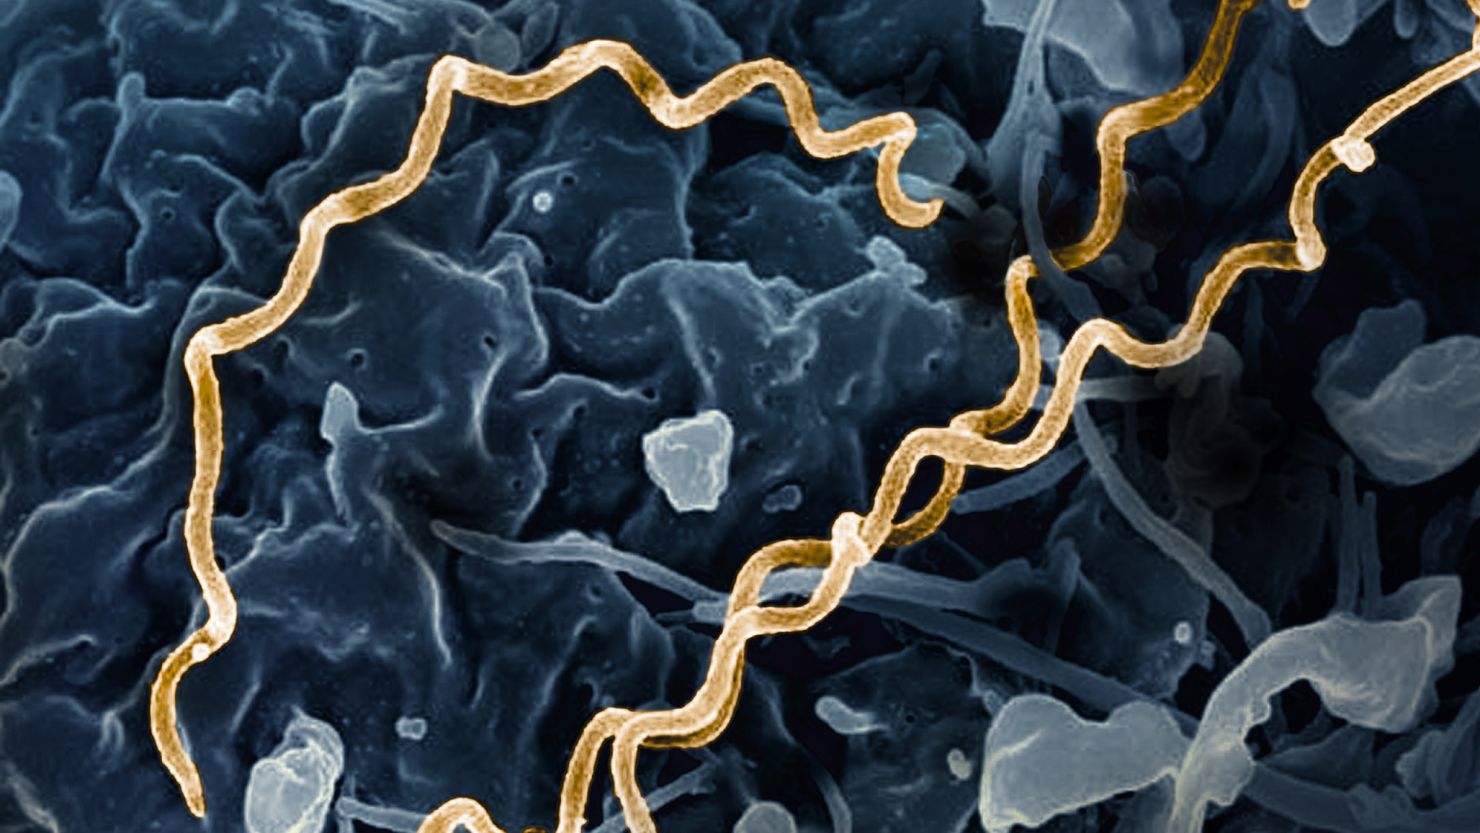 Syphilis is caused by the bacteria Treponema pallidum. Cases have been increasing in the United States.